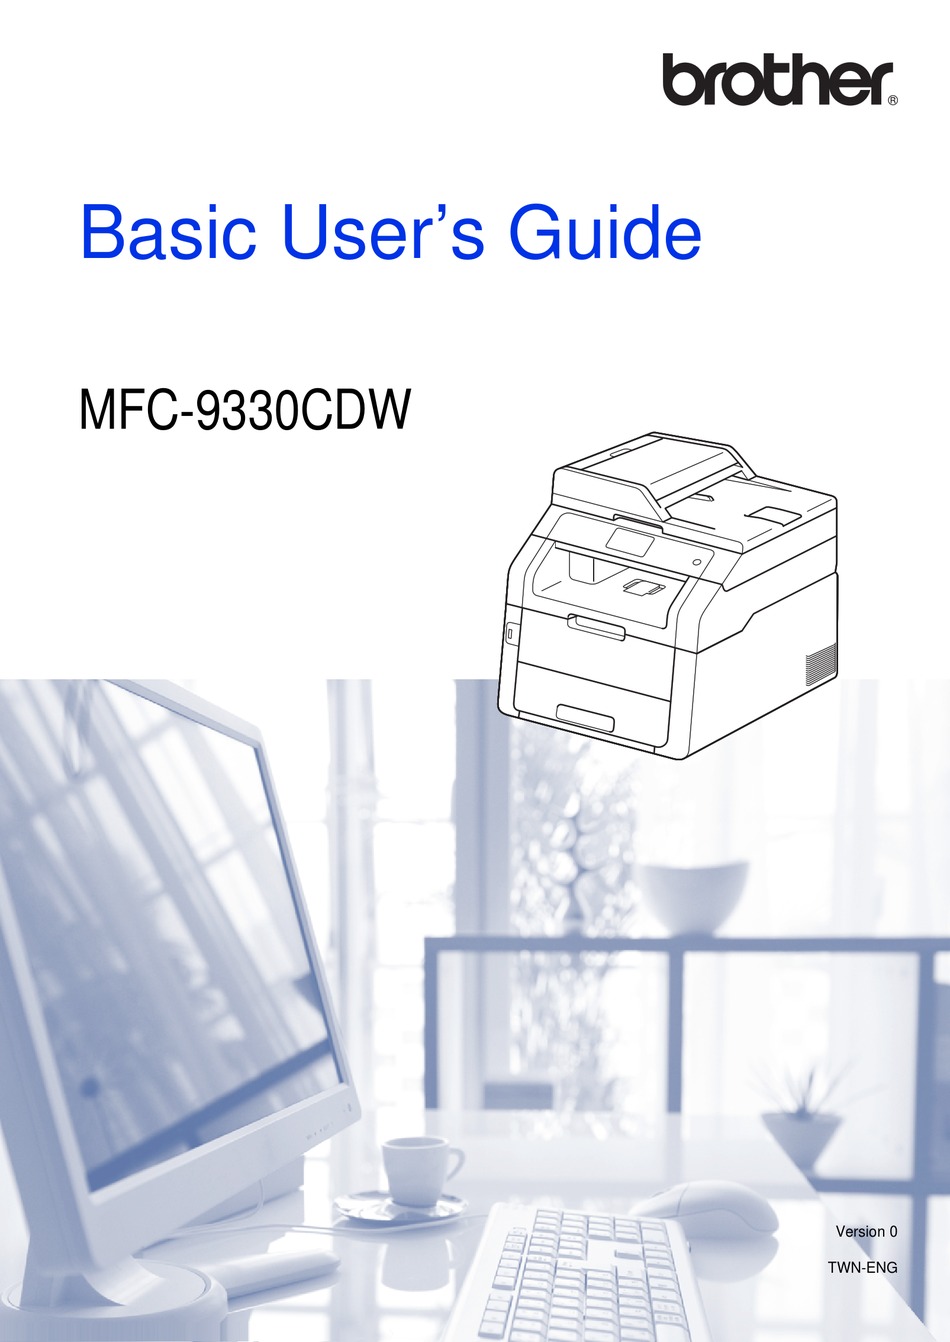 how to put a brother mfc 9330cdw online